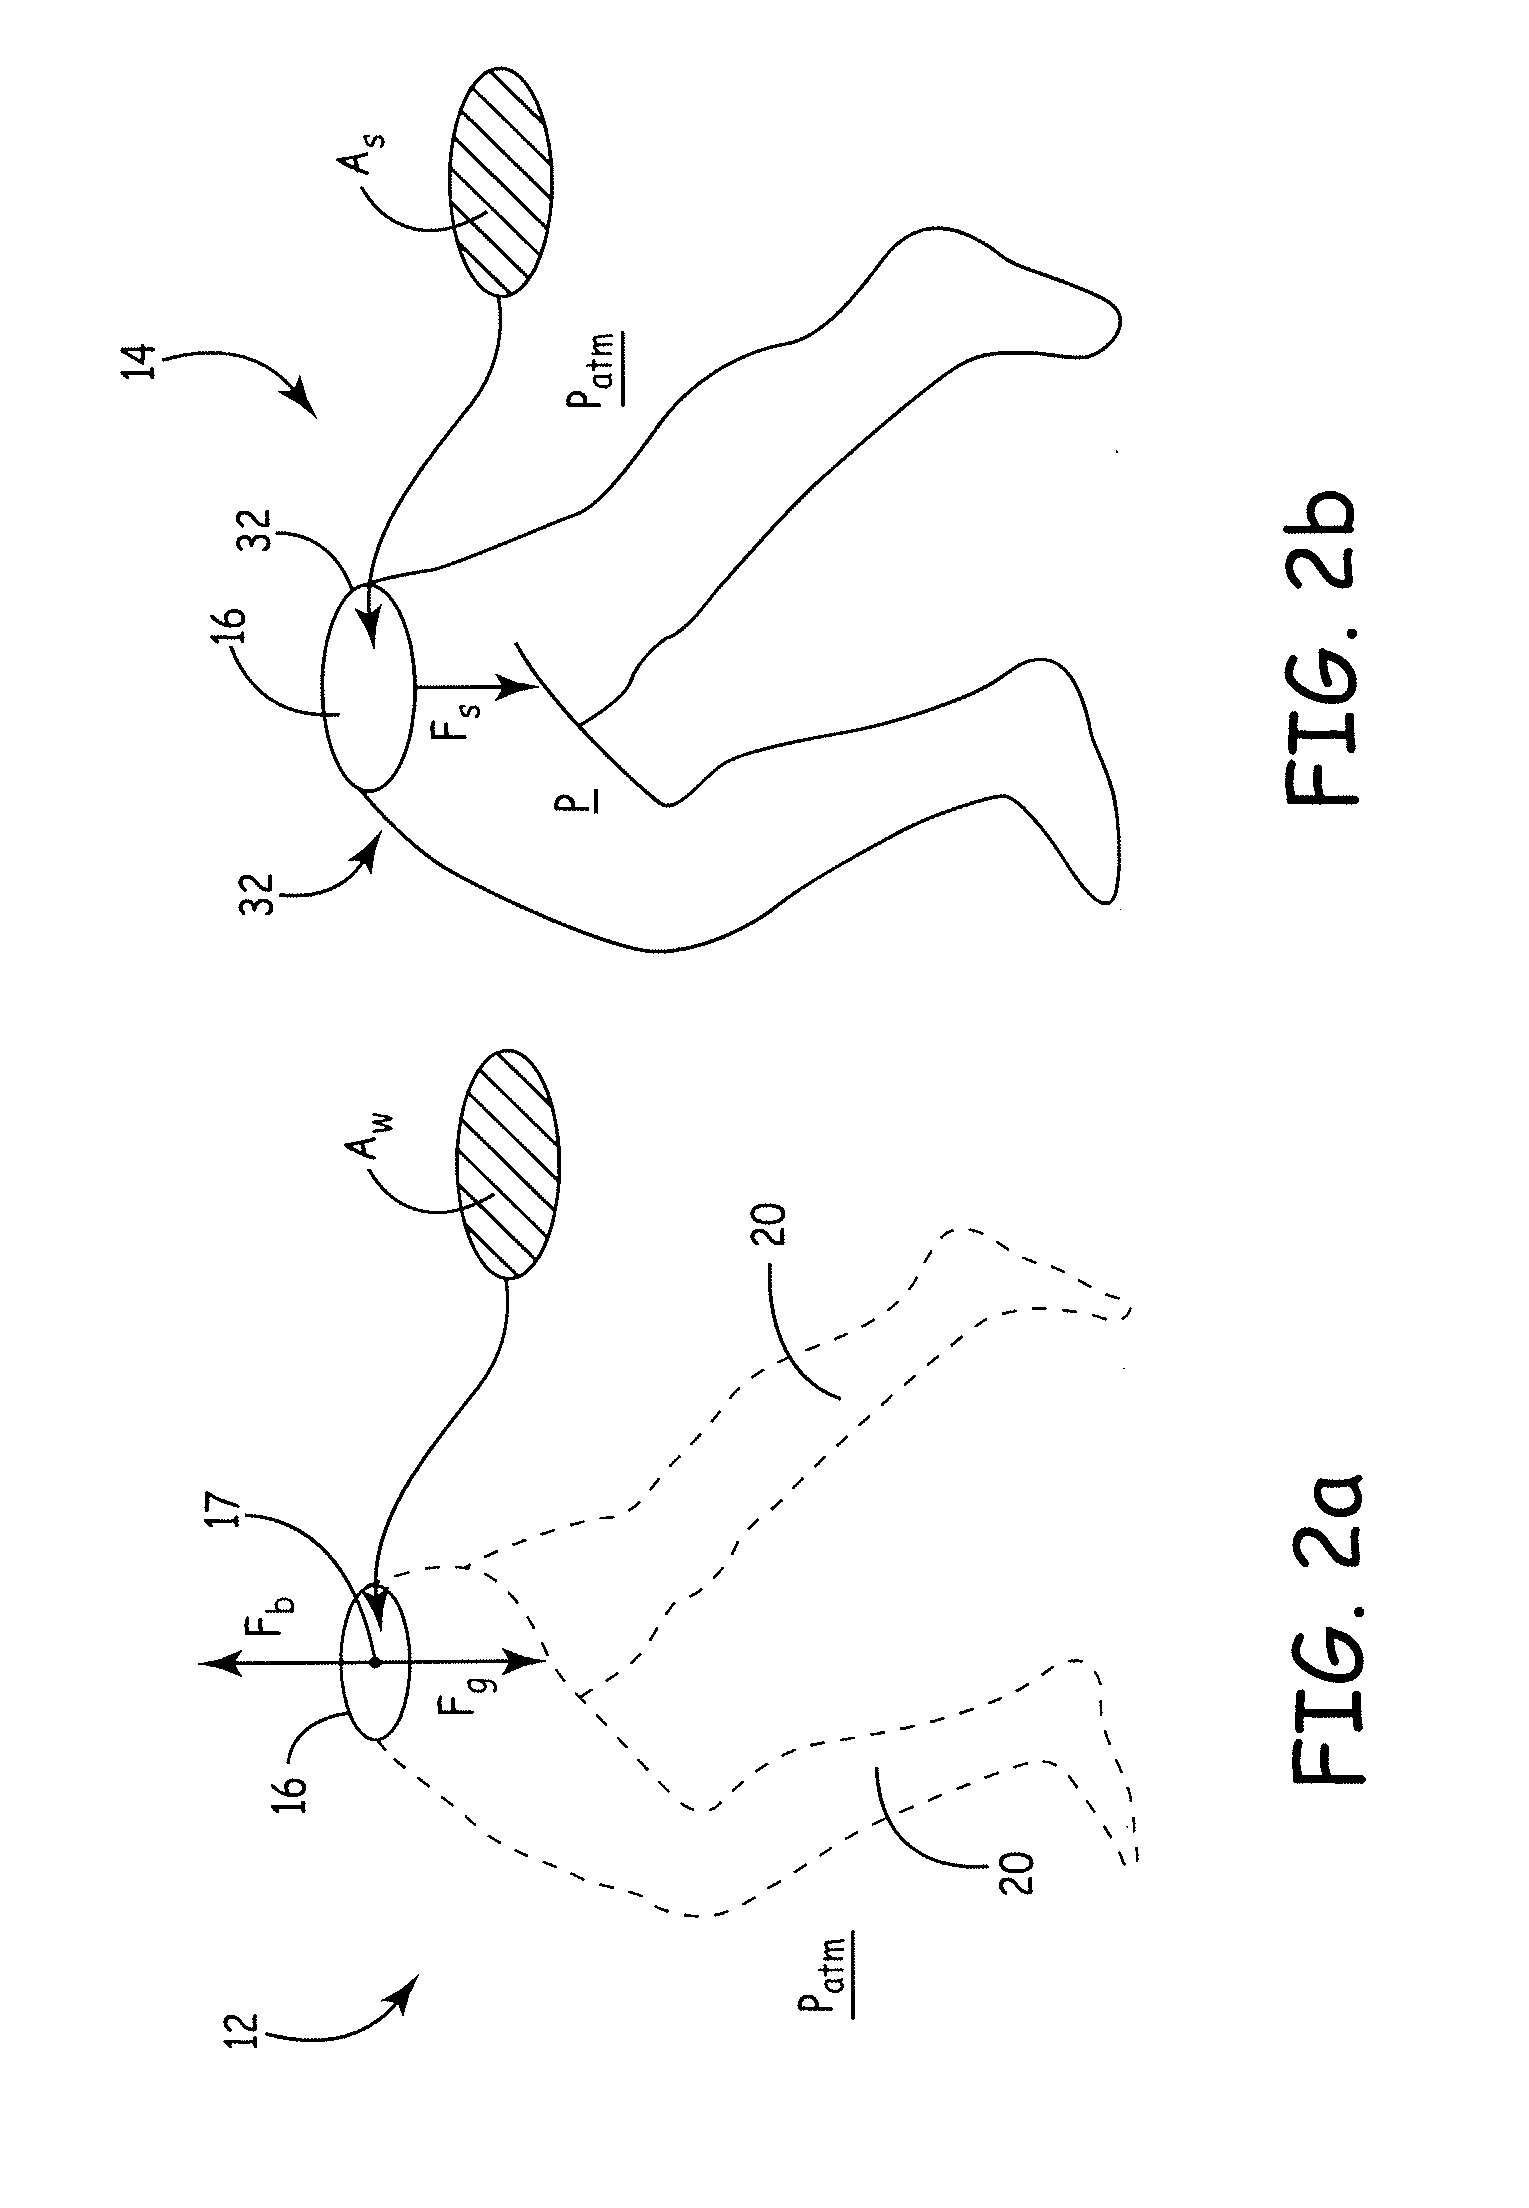 Suspension and body attachment system and differential pressure suit for body weight support devices